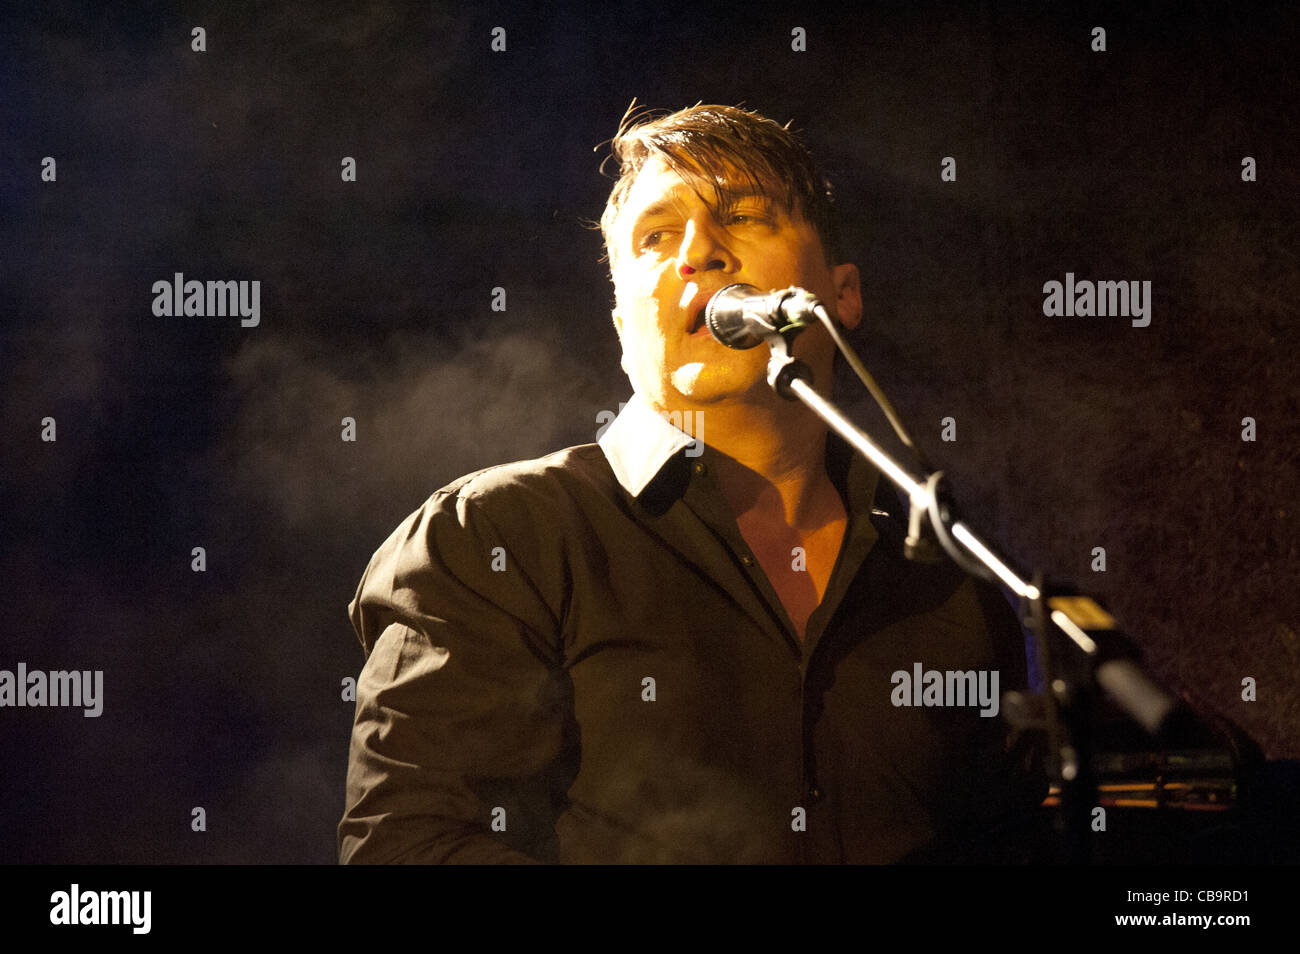 Greg Dulli of The Twilight Singers performs in Rome Stock Photo